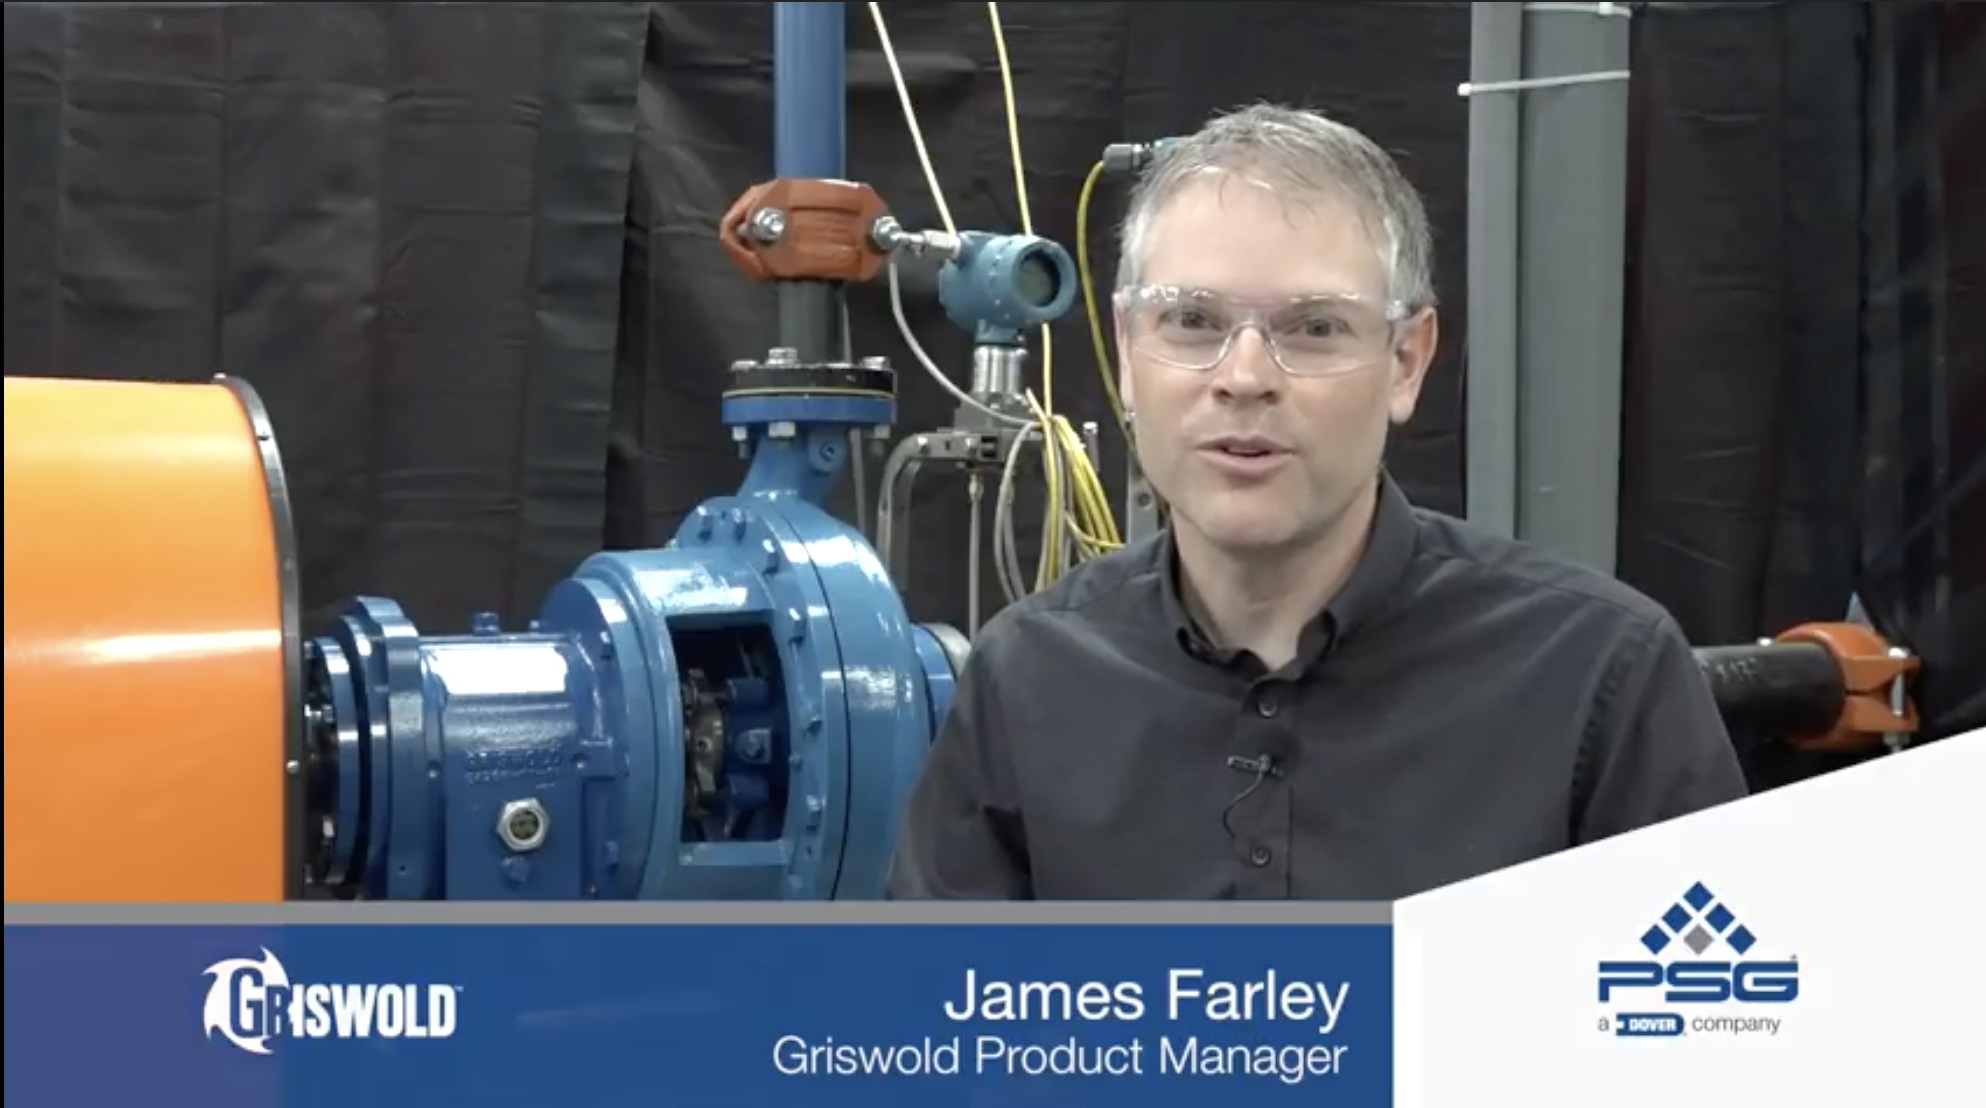 In this two-part Centrifugal Pump Minute vlog, James Farley, Griswold product manager, looks at the pump Affinity Laws.